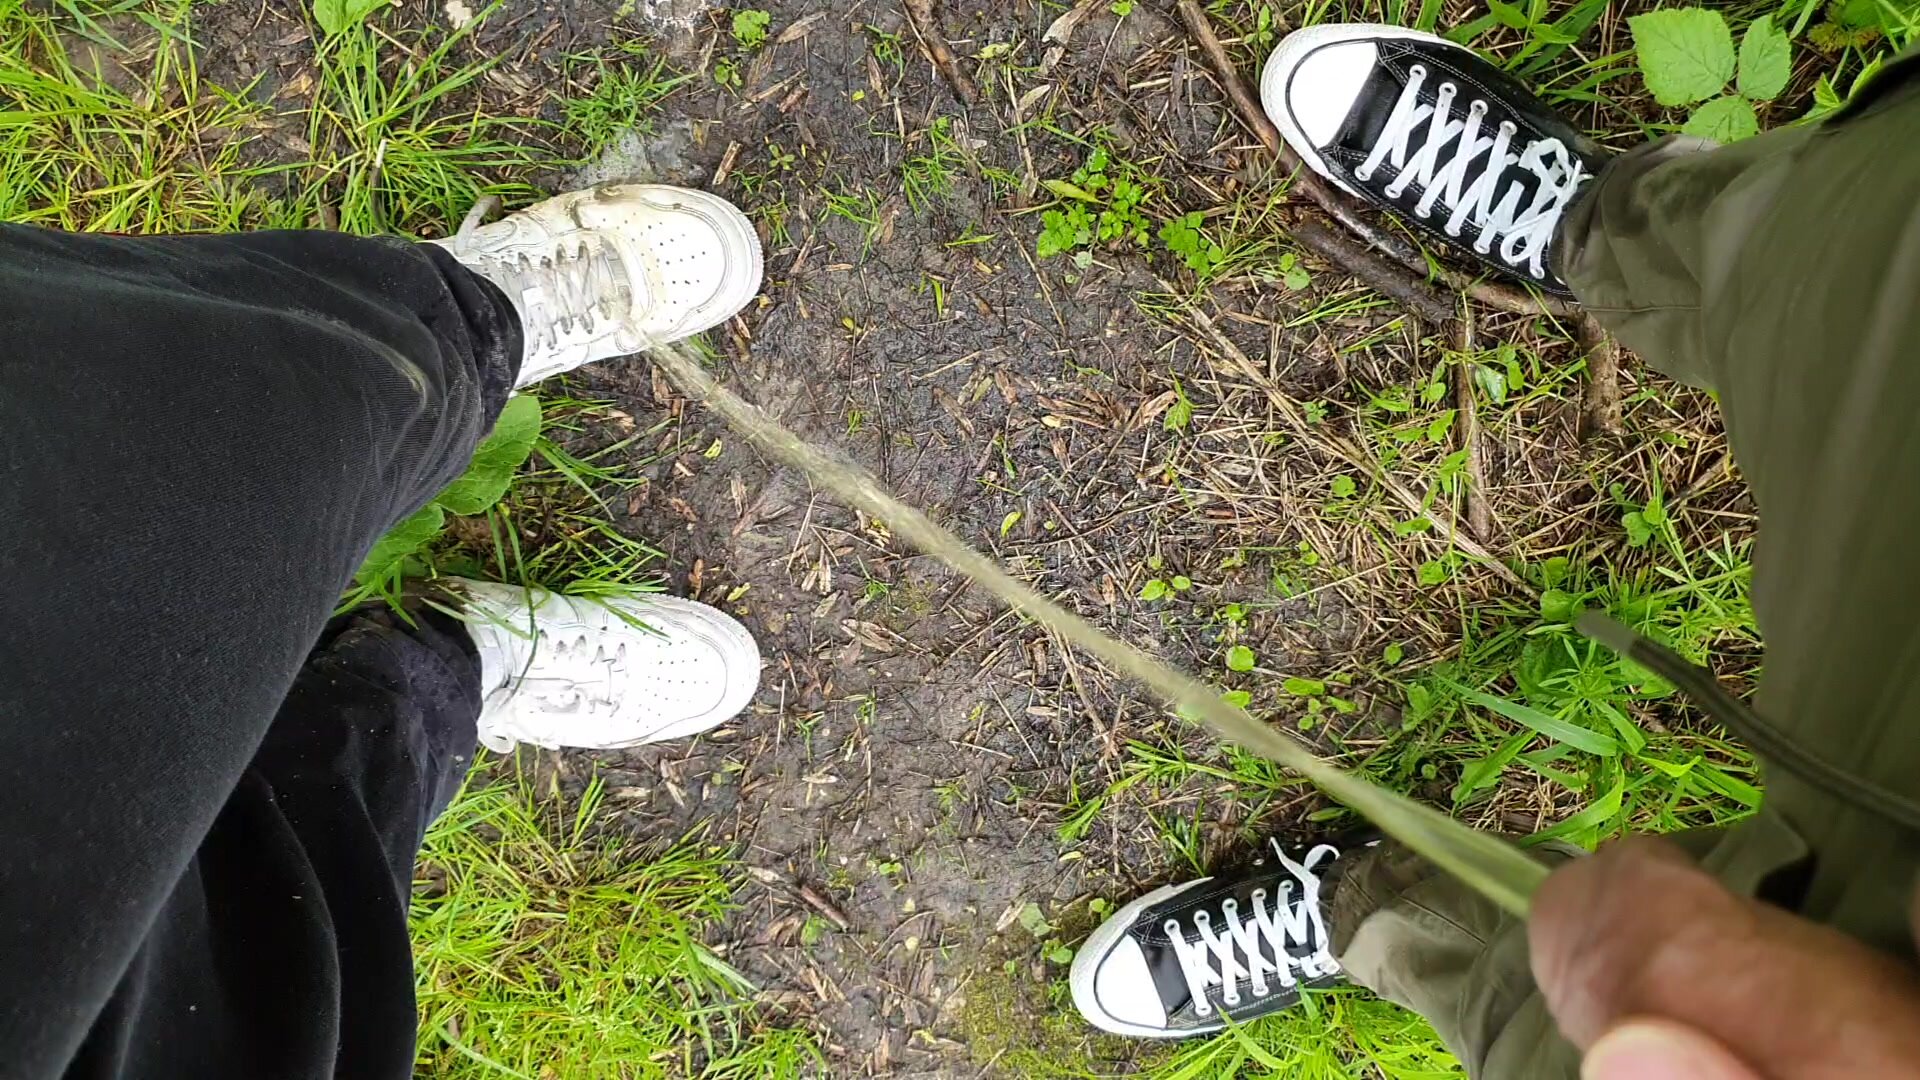 Cleaning Sneaks outdoor with Piss